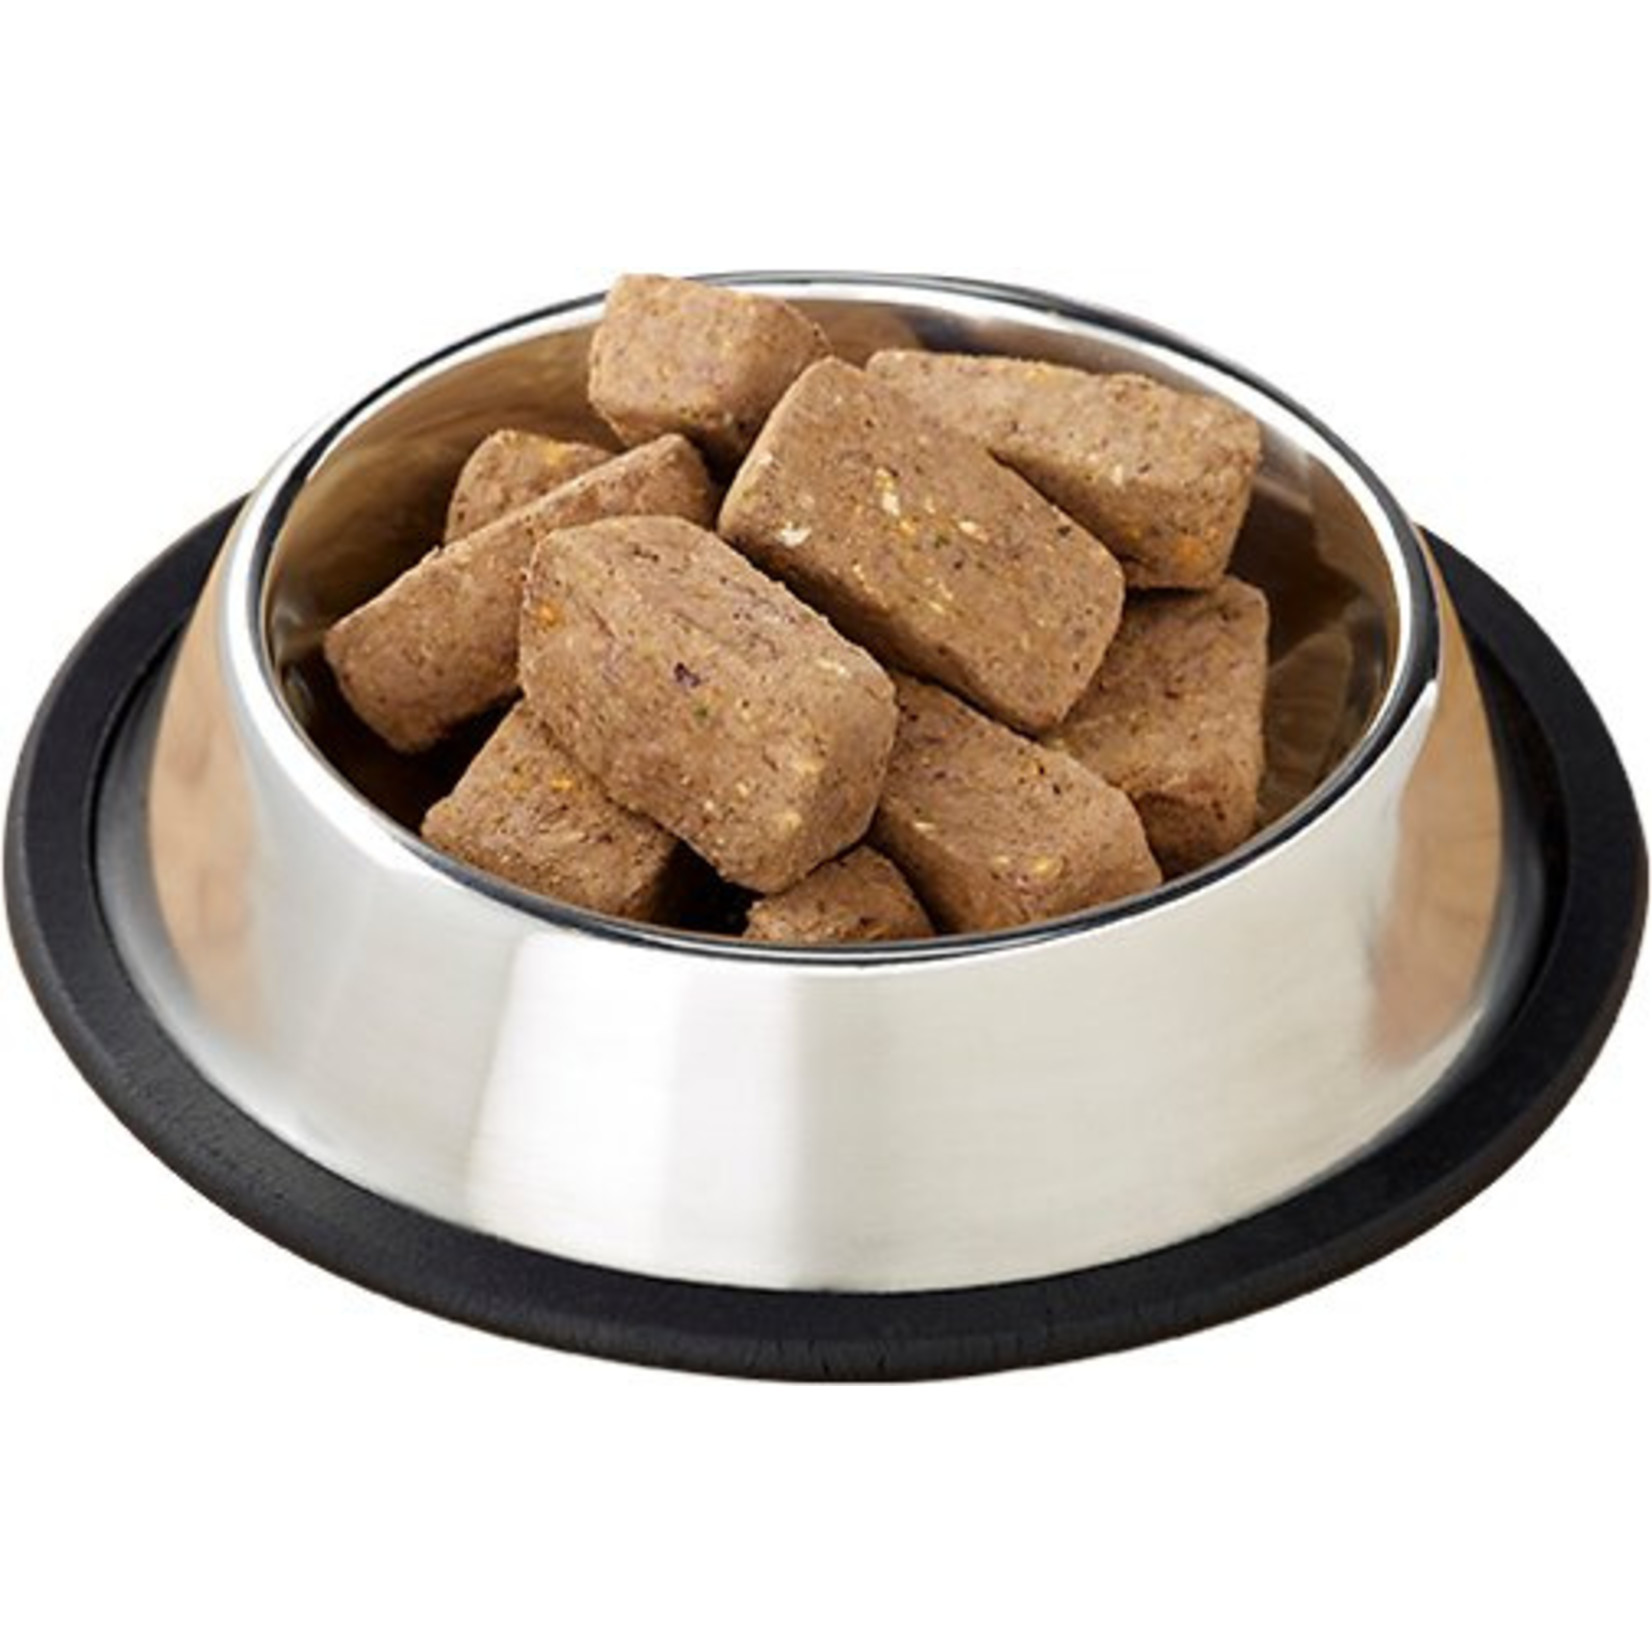 Primal Pet Foods Primal Freeze-Dried Nuggets - Beef & Salmon Formula for Cats